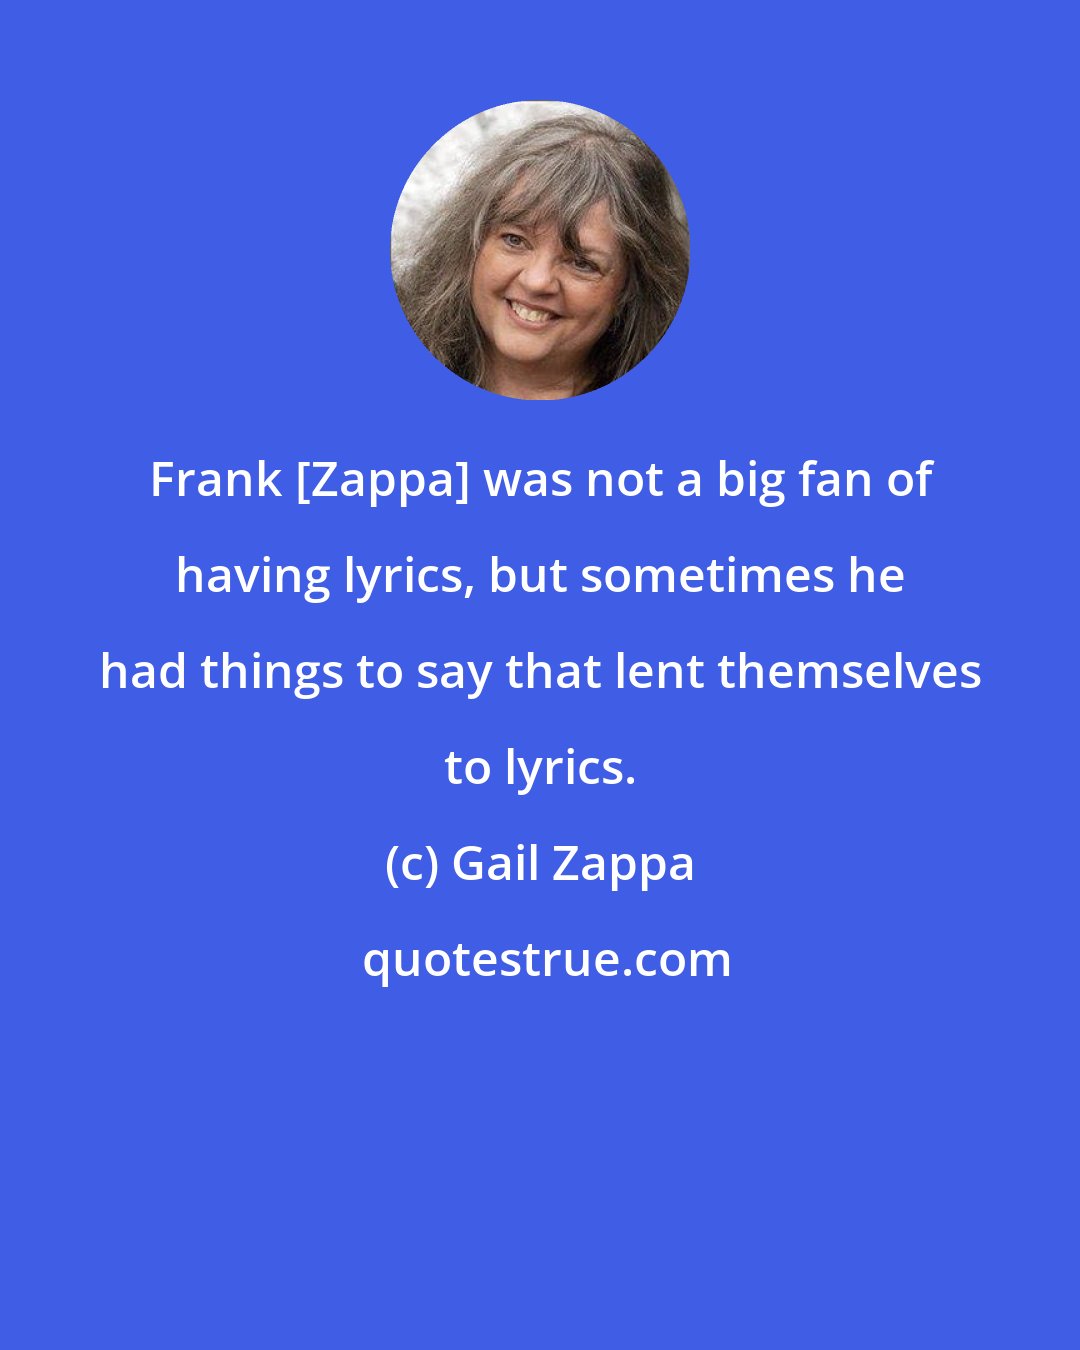 Gail Zappa: Frank [Zappa] was not a big fan of having lyrics, but sometimes he had things to say that lent themselves to lyrics.